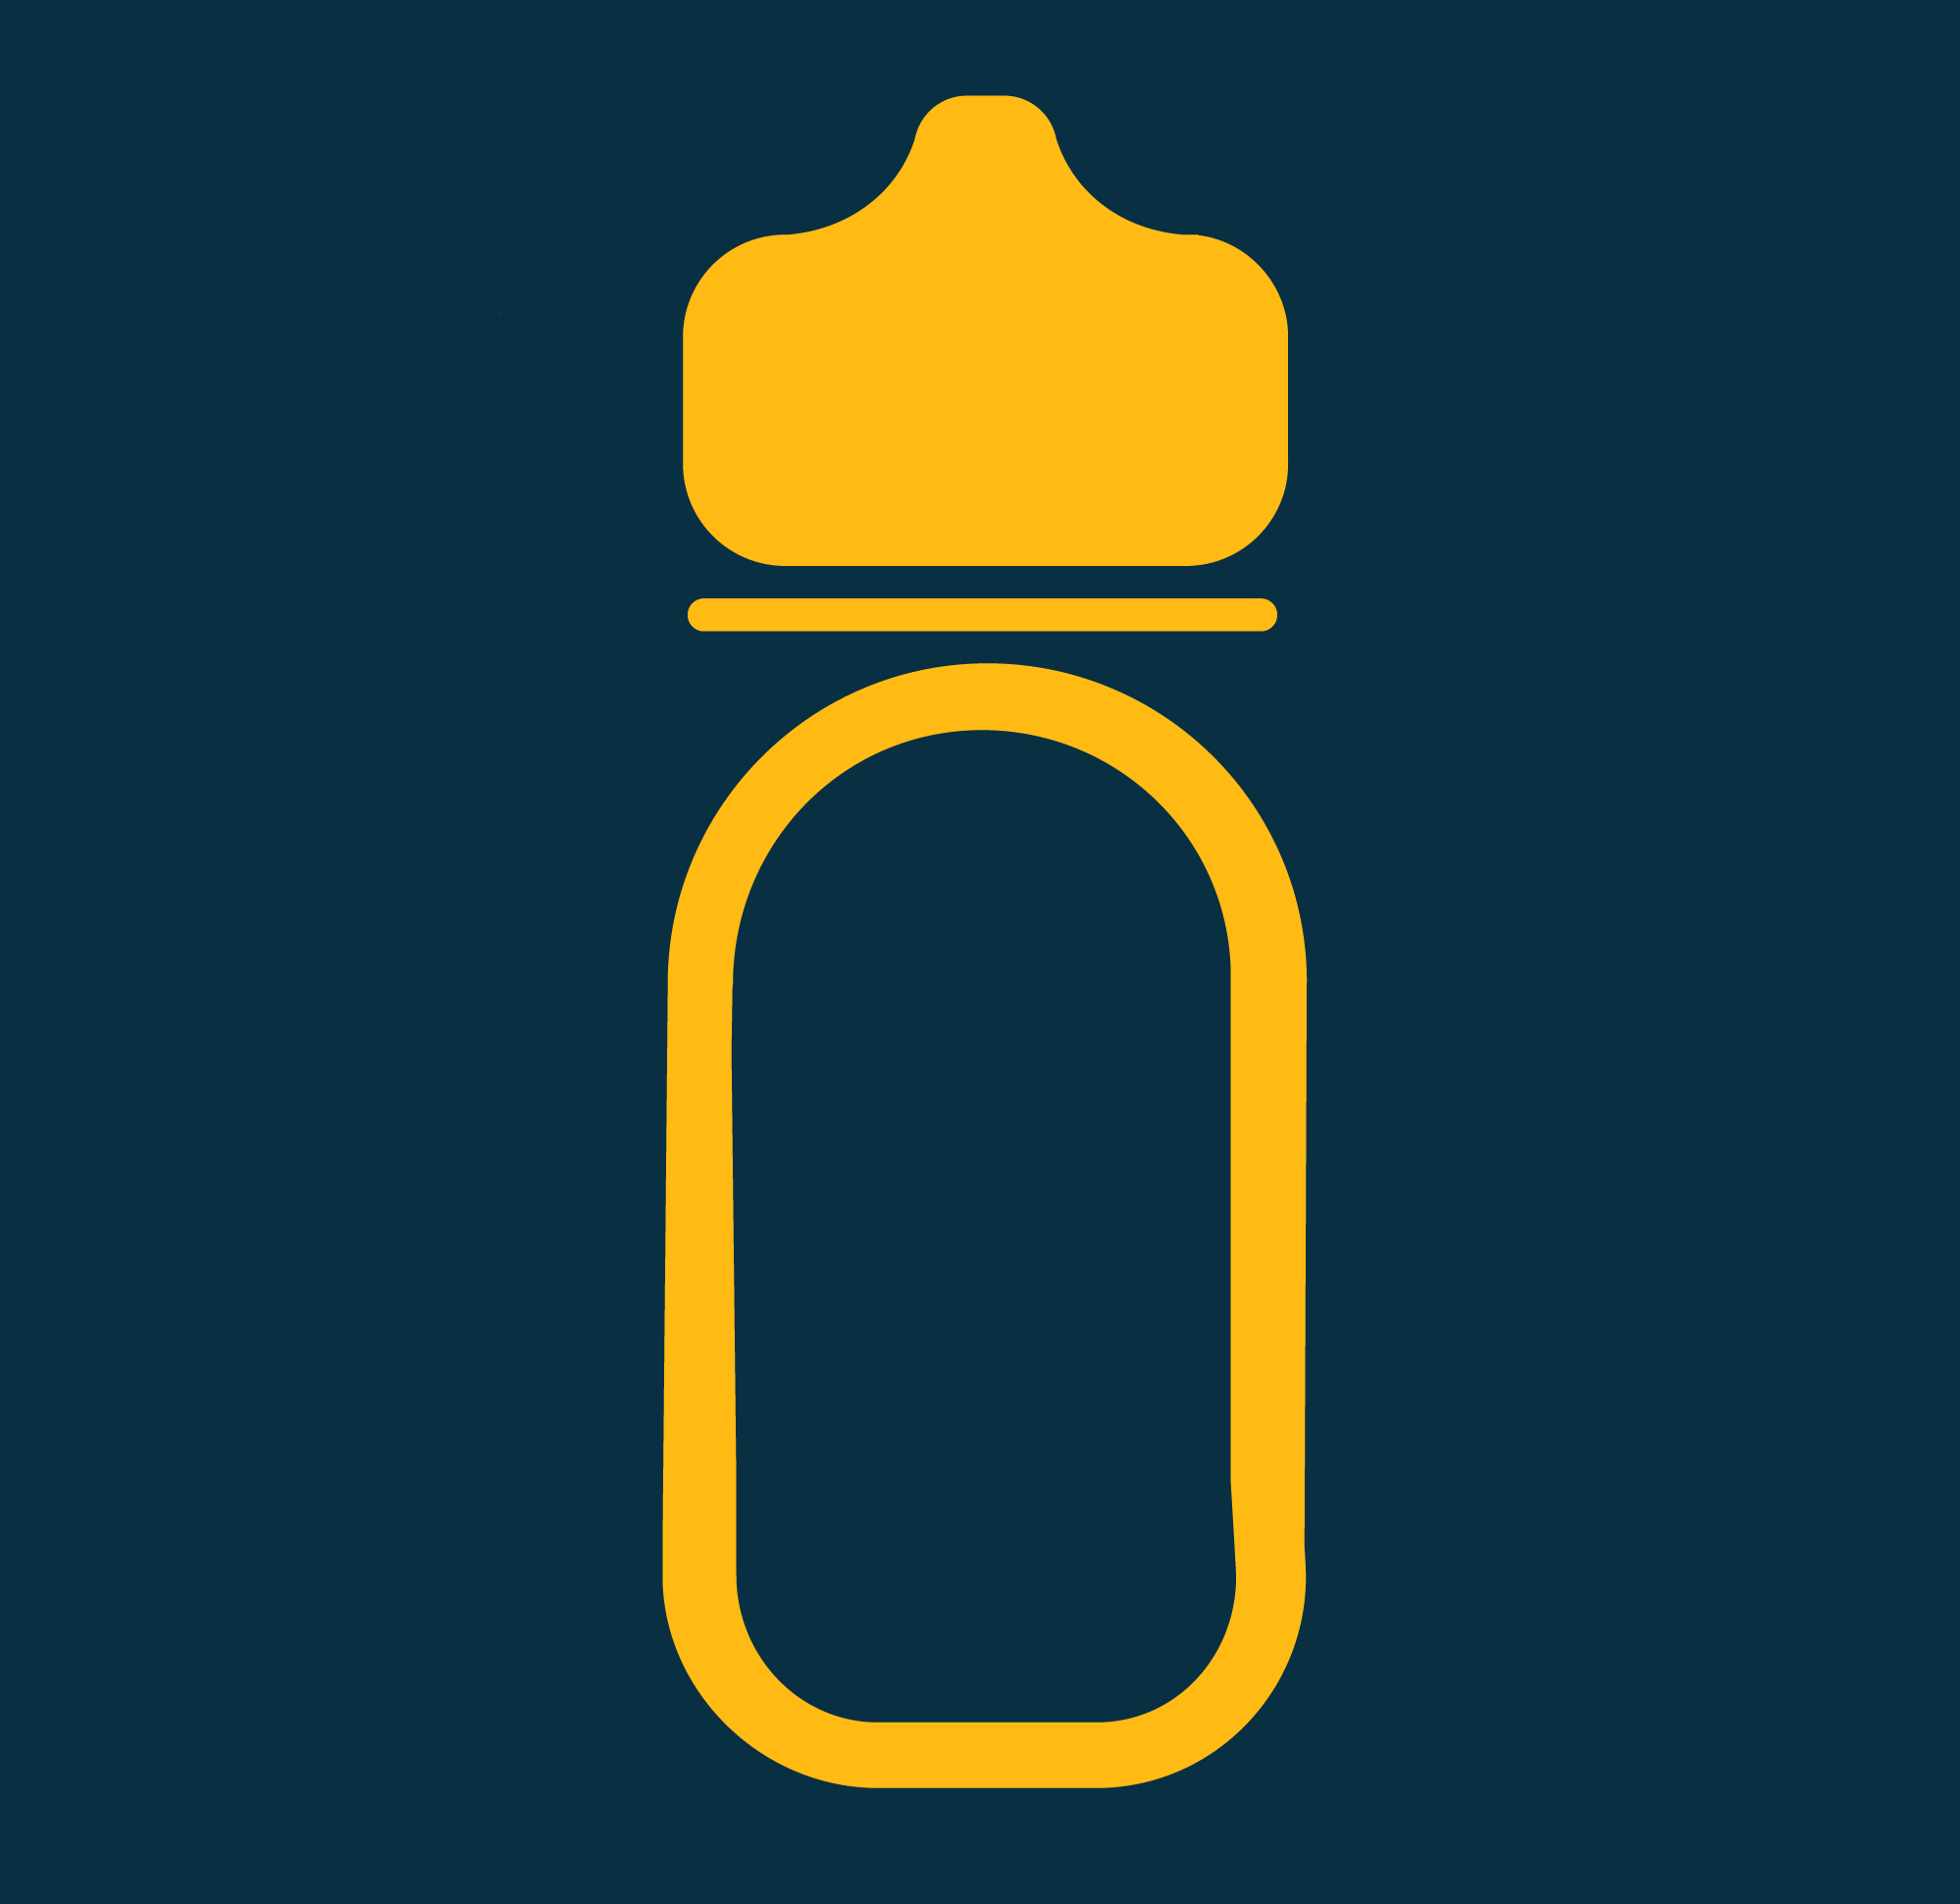 A yellow, simplified logo of an eyedrop medication bottle on a dark green background.